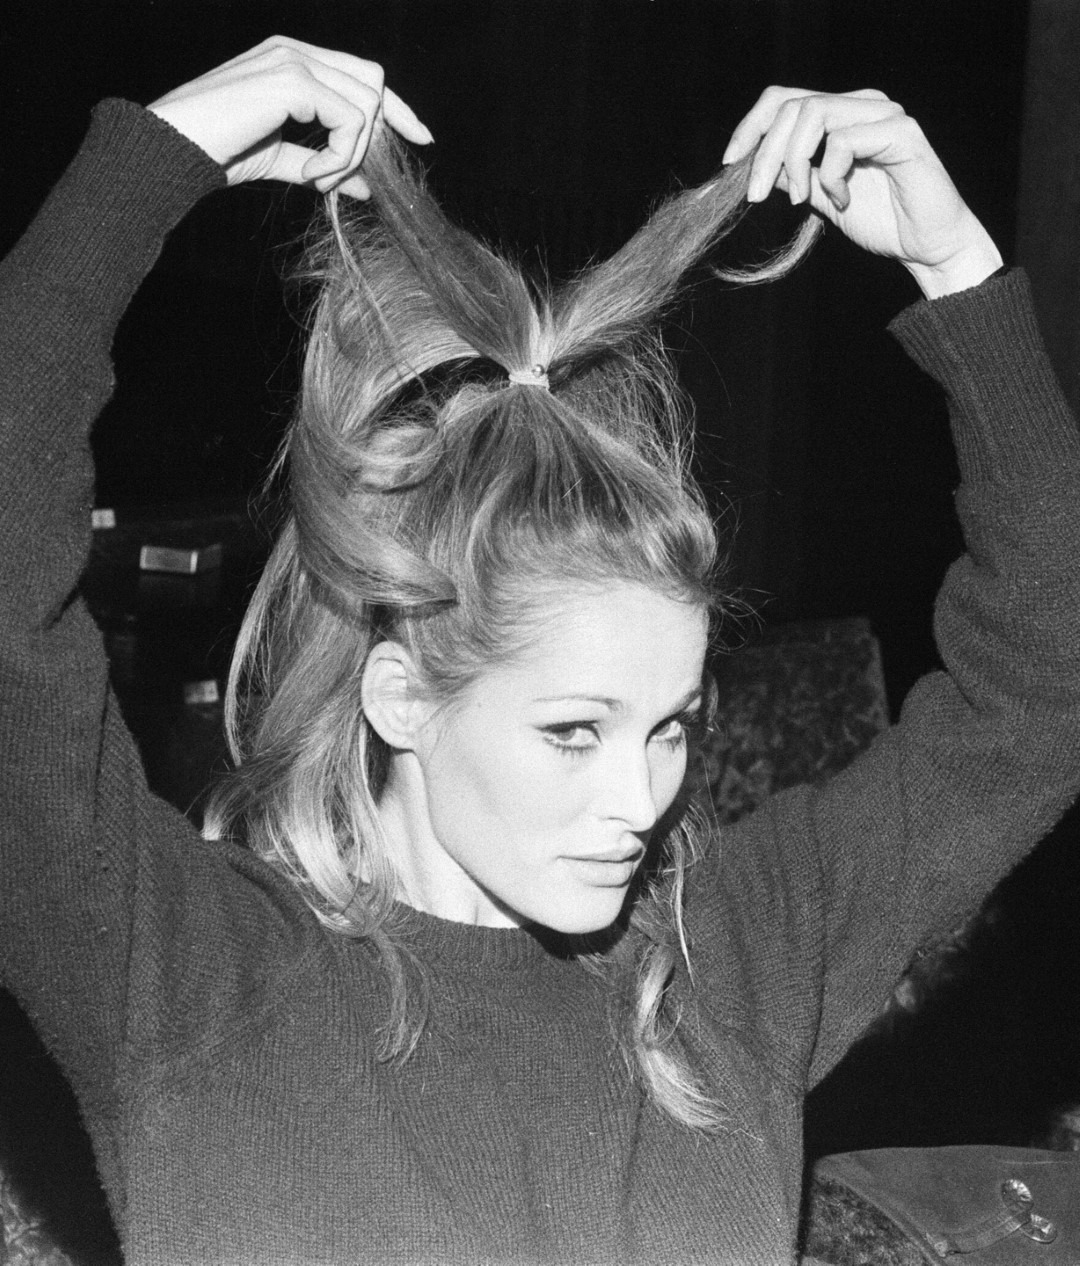 Rehearsals ahead of Royal Film Performance for Born Free, at The Odeon, Leicester Square, London, Sunday 13th March 1966, picture shows Ursula Andress pulls at her hair. (Photo by Arthur Sidey & Alistar Macdonald/Daily Mirror/Mirrorpix/Getty Images)